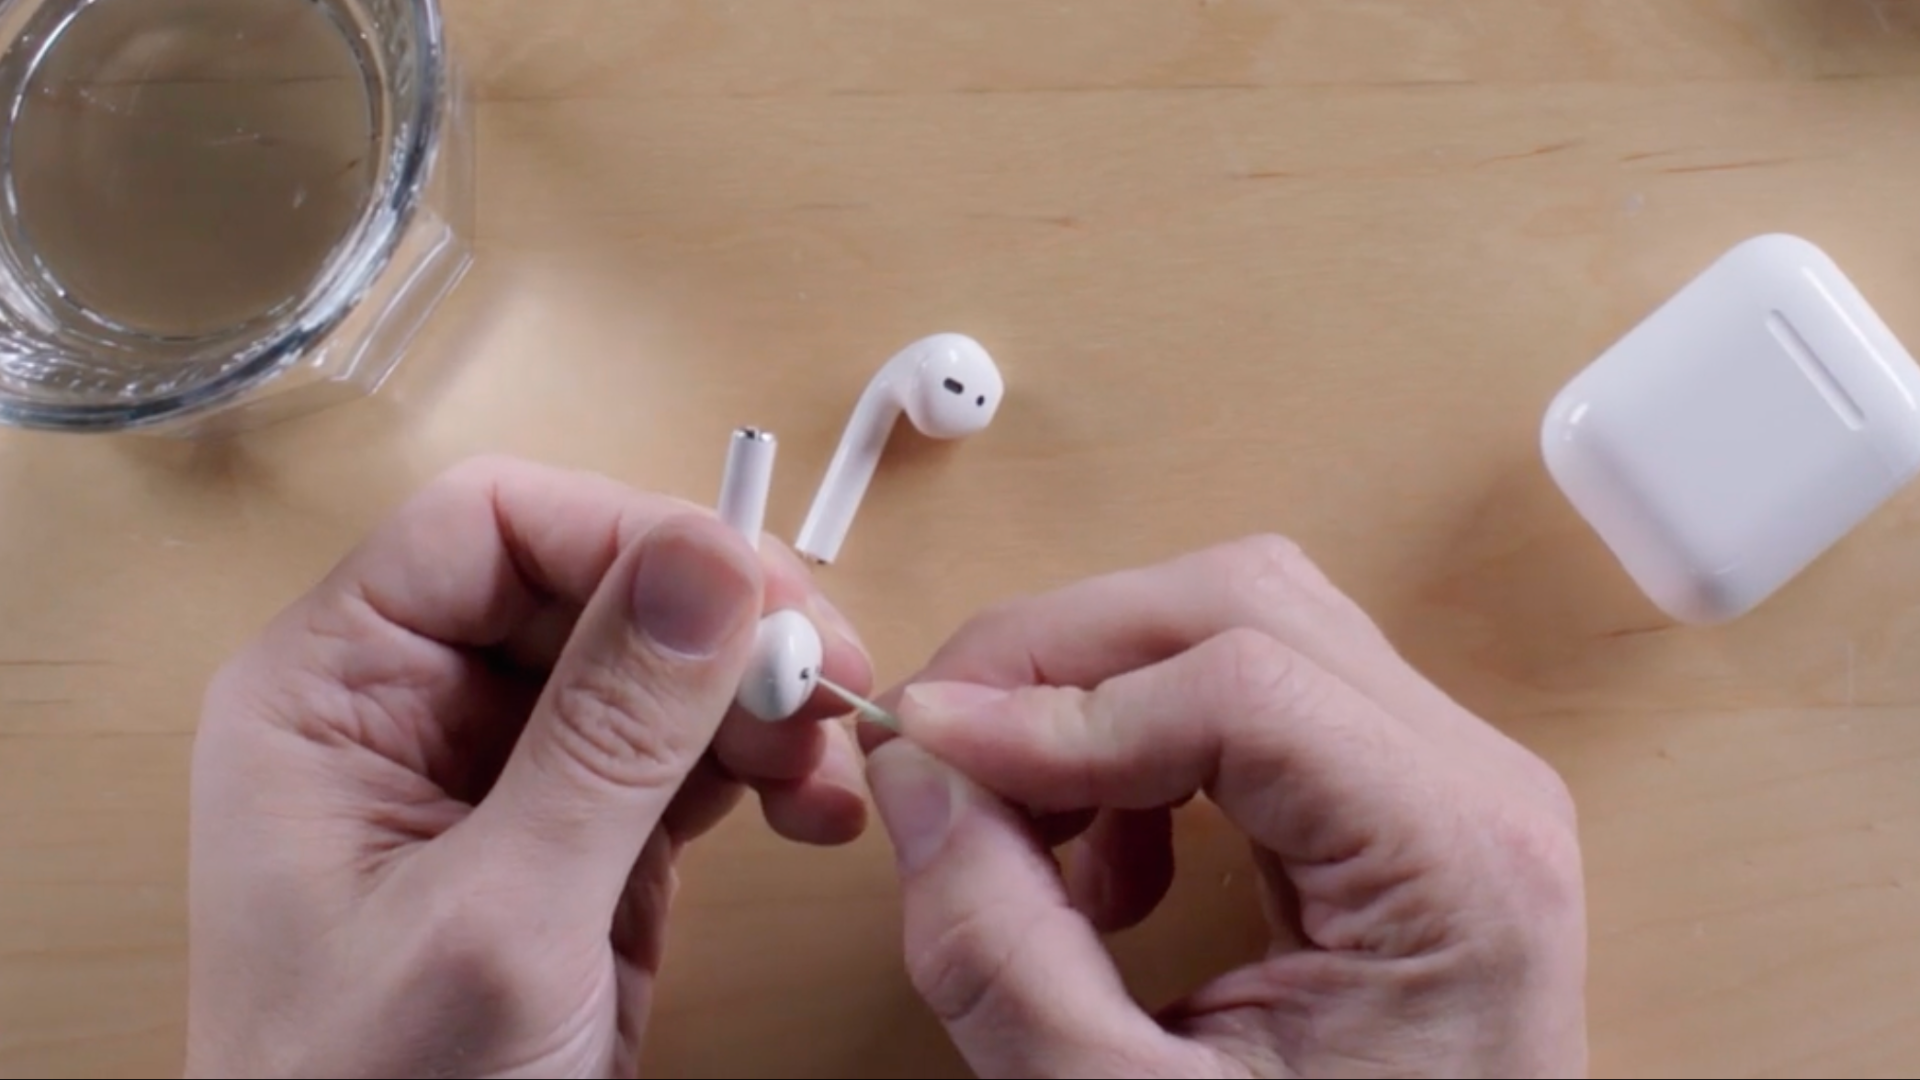 Two white hands, one holding the airpod, the other cleaning it with a toothpick.